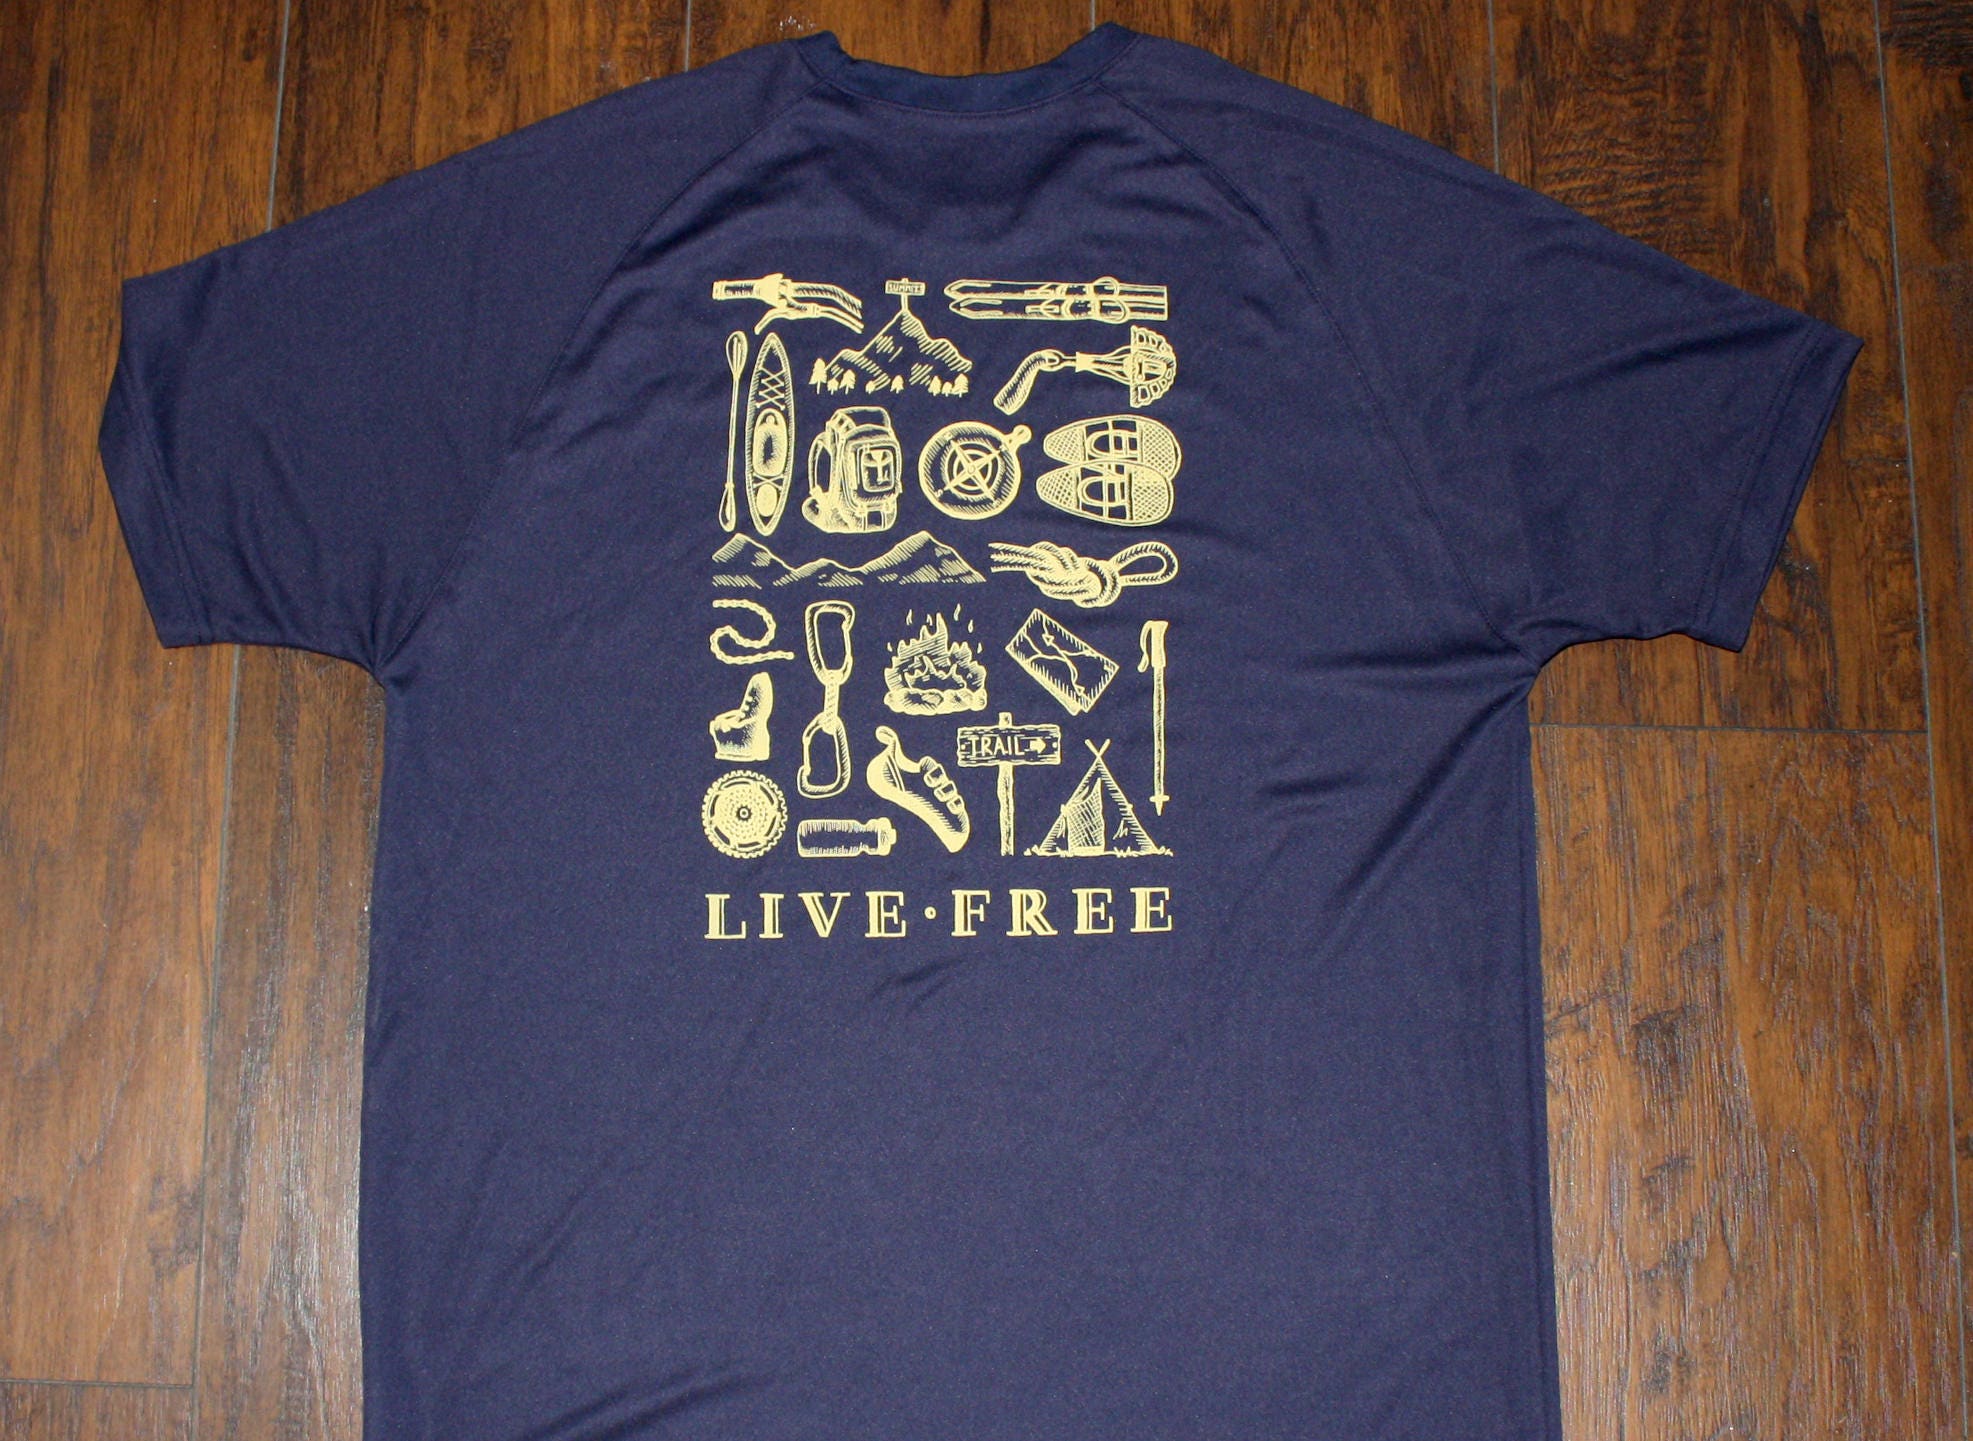 Men's Live Free Active Shirt hiking camping outdoor | Etsy